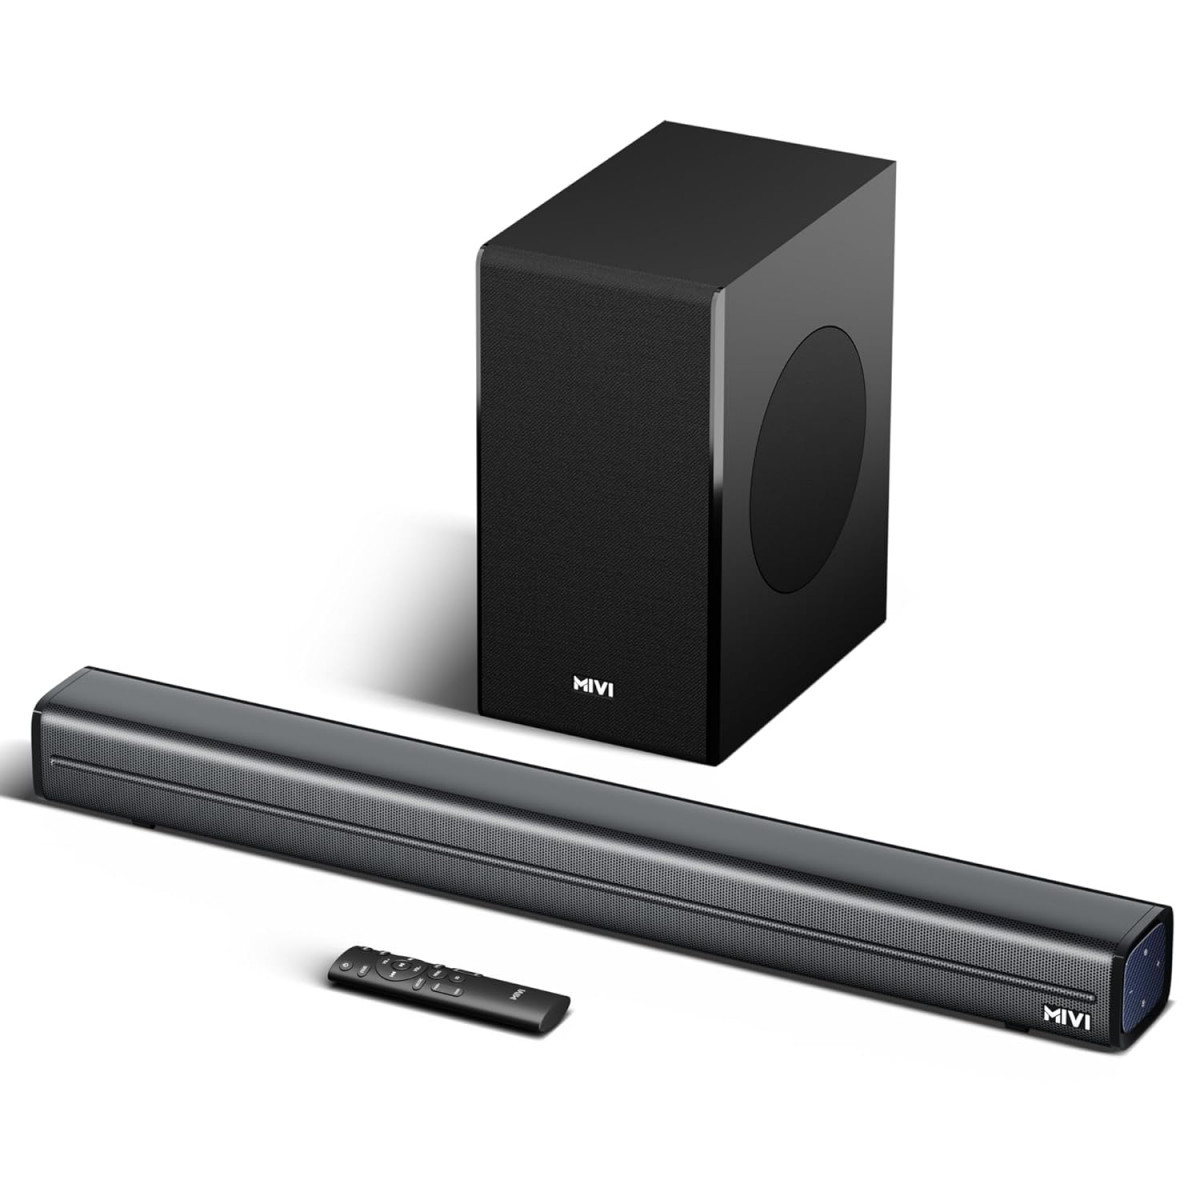 Mivi Fort Q200 Soundbar with 200W Surround Sound 21 Channel soundbar with an External subwoofer Multiple EQ and Input Modes Remote Accessibility Bluetooth v53 Made in India Sound bar for TV